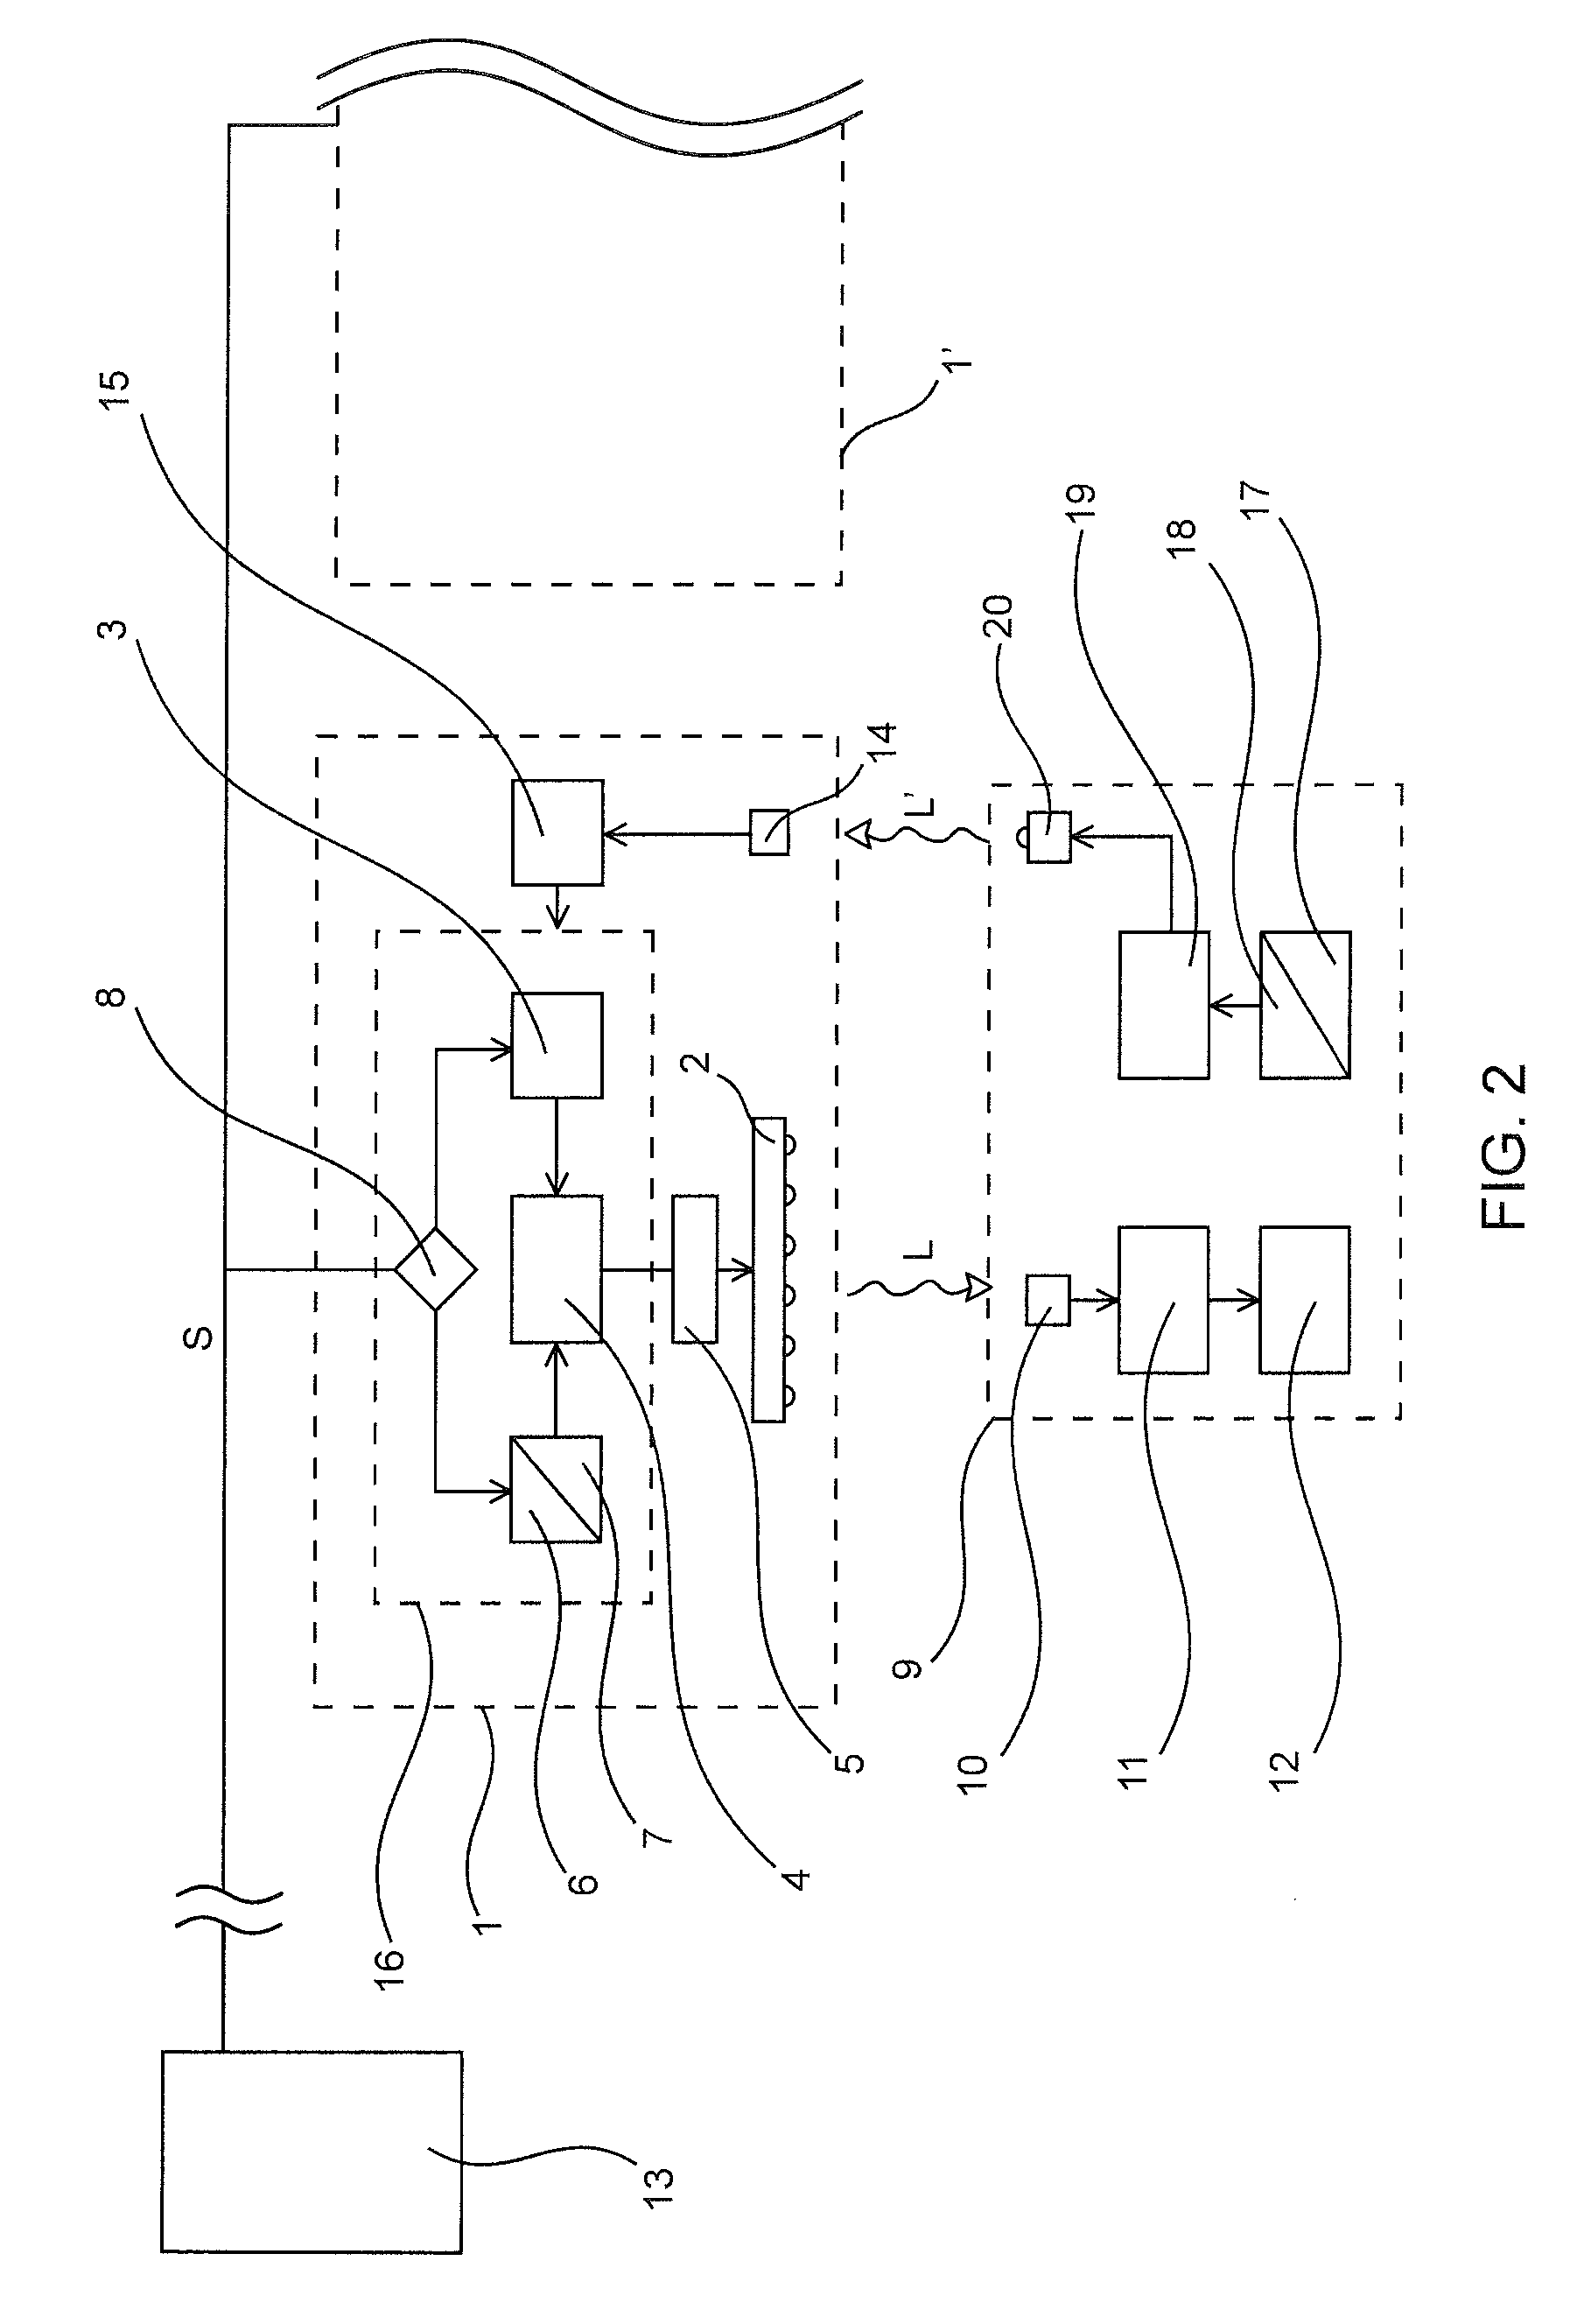 Lighting apparatus having a lighting means comprising at least one LED